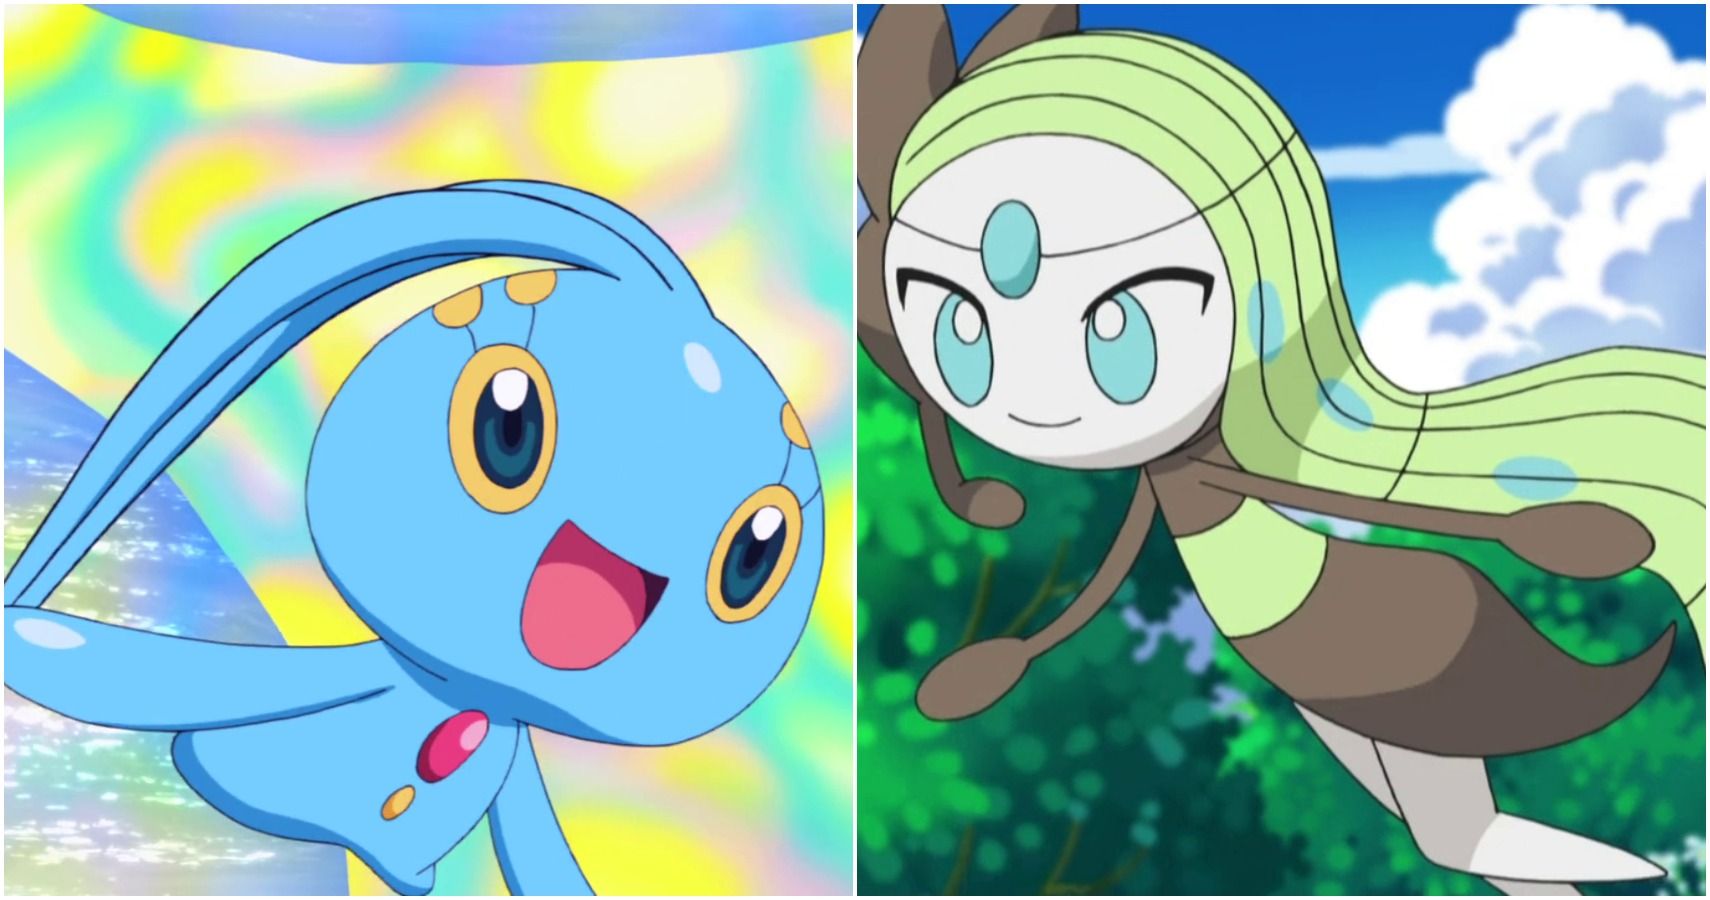 Meet the rare and powerful legendary cute pokemon in the franchise